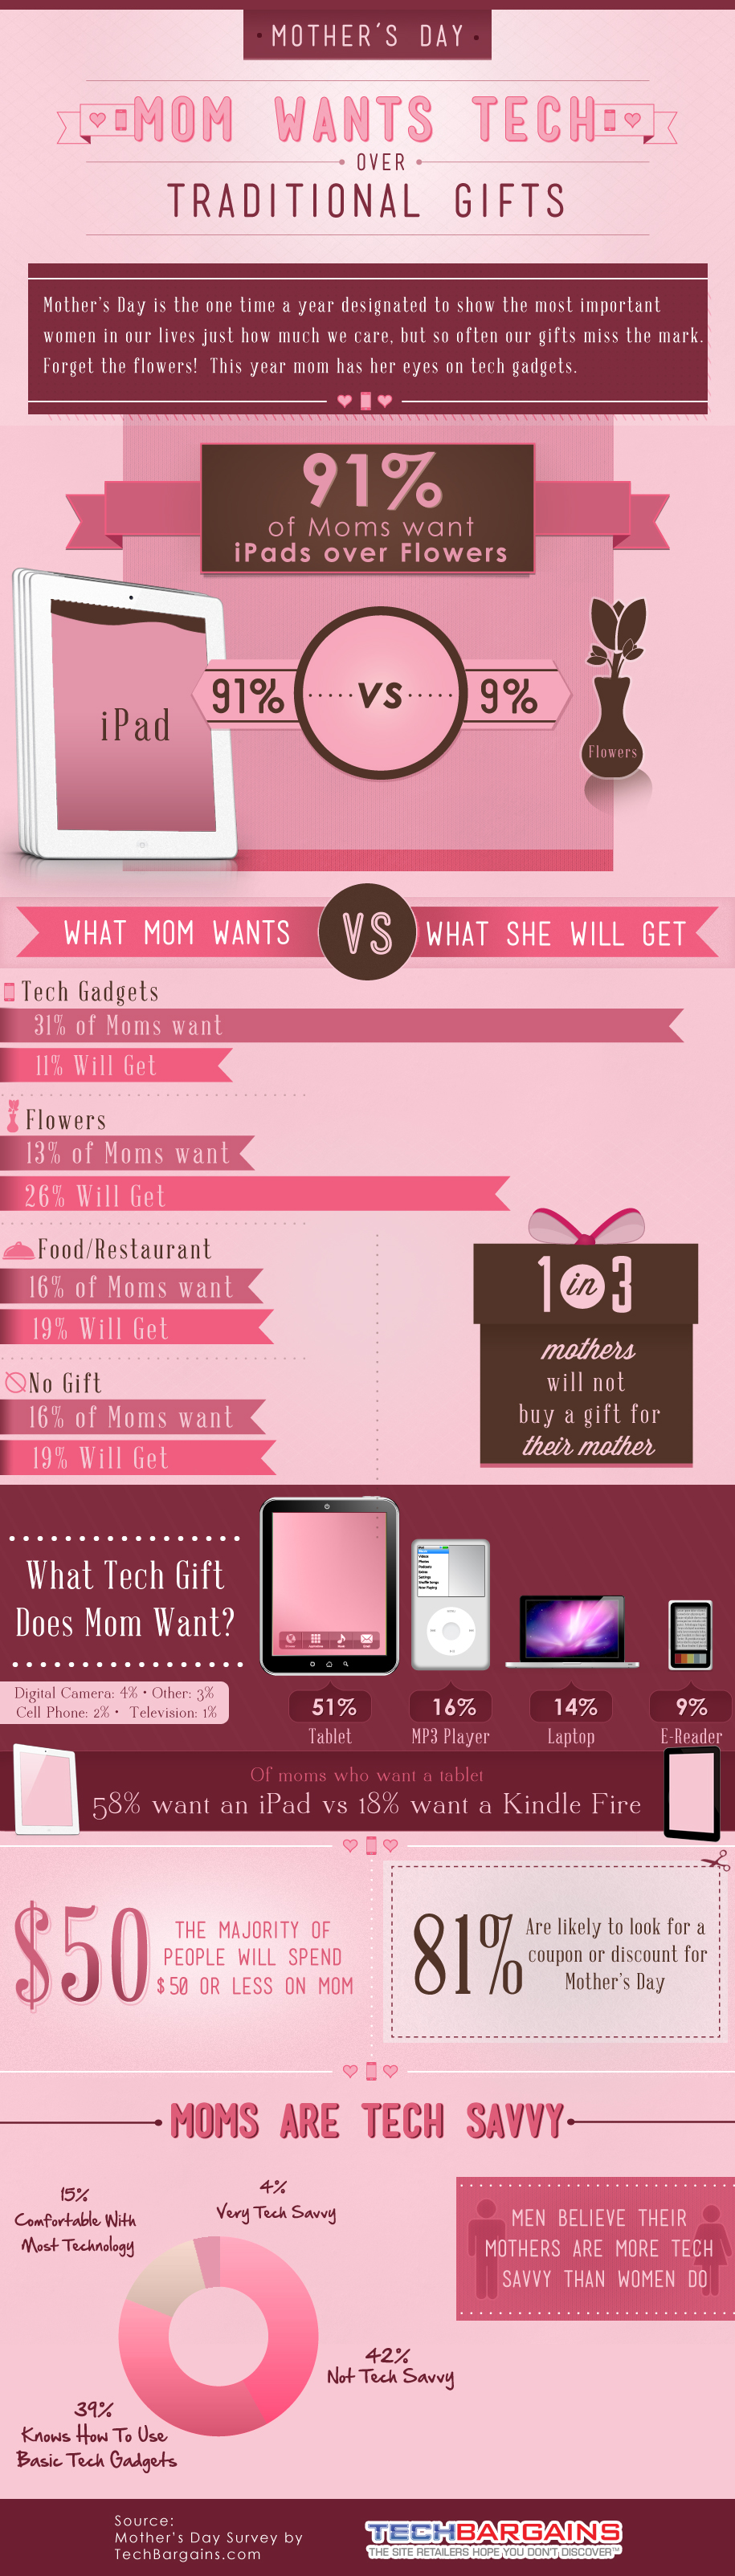 91% of Moms Want iPads Over Flowers for Mother&#039;s Day